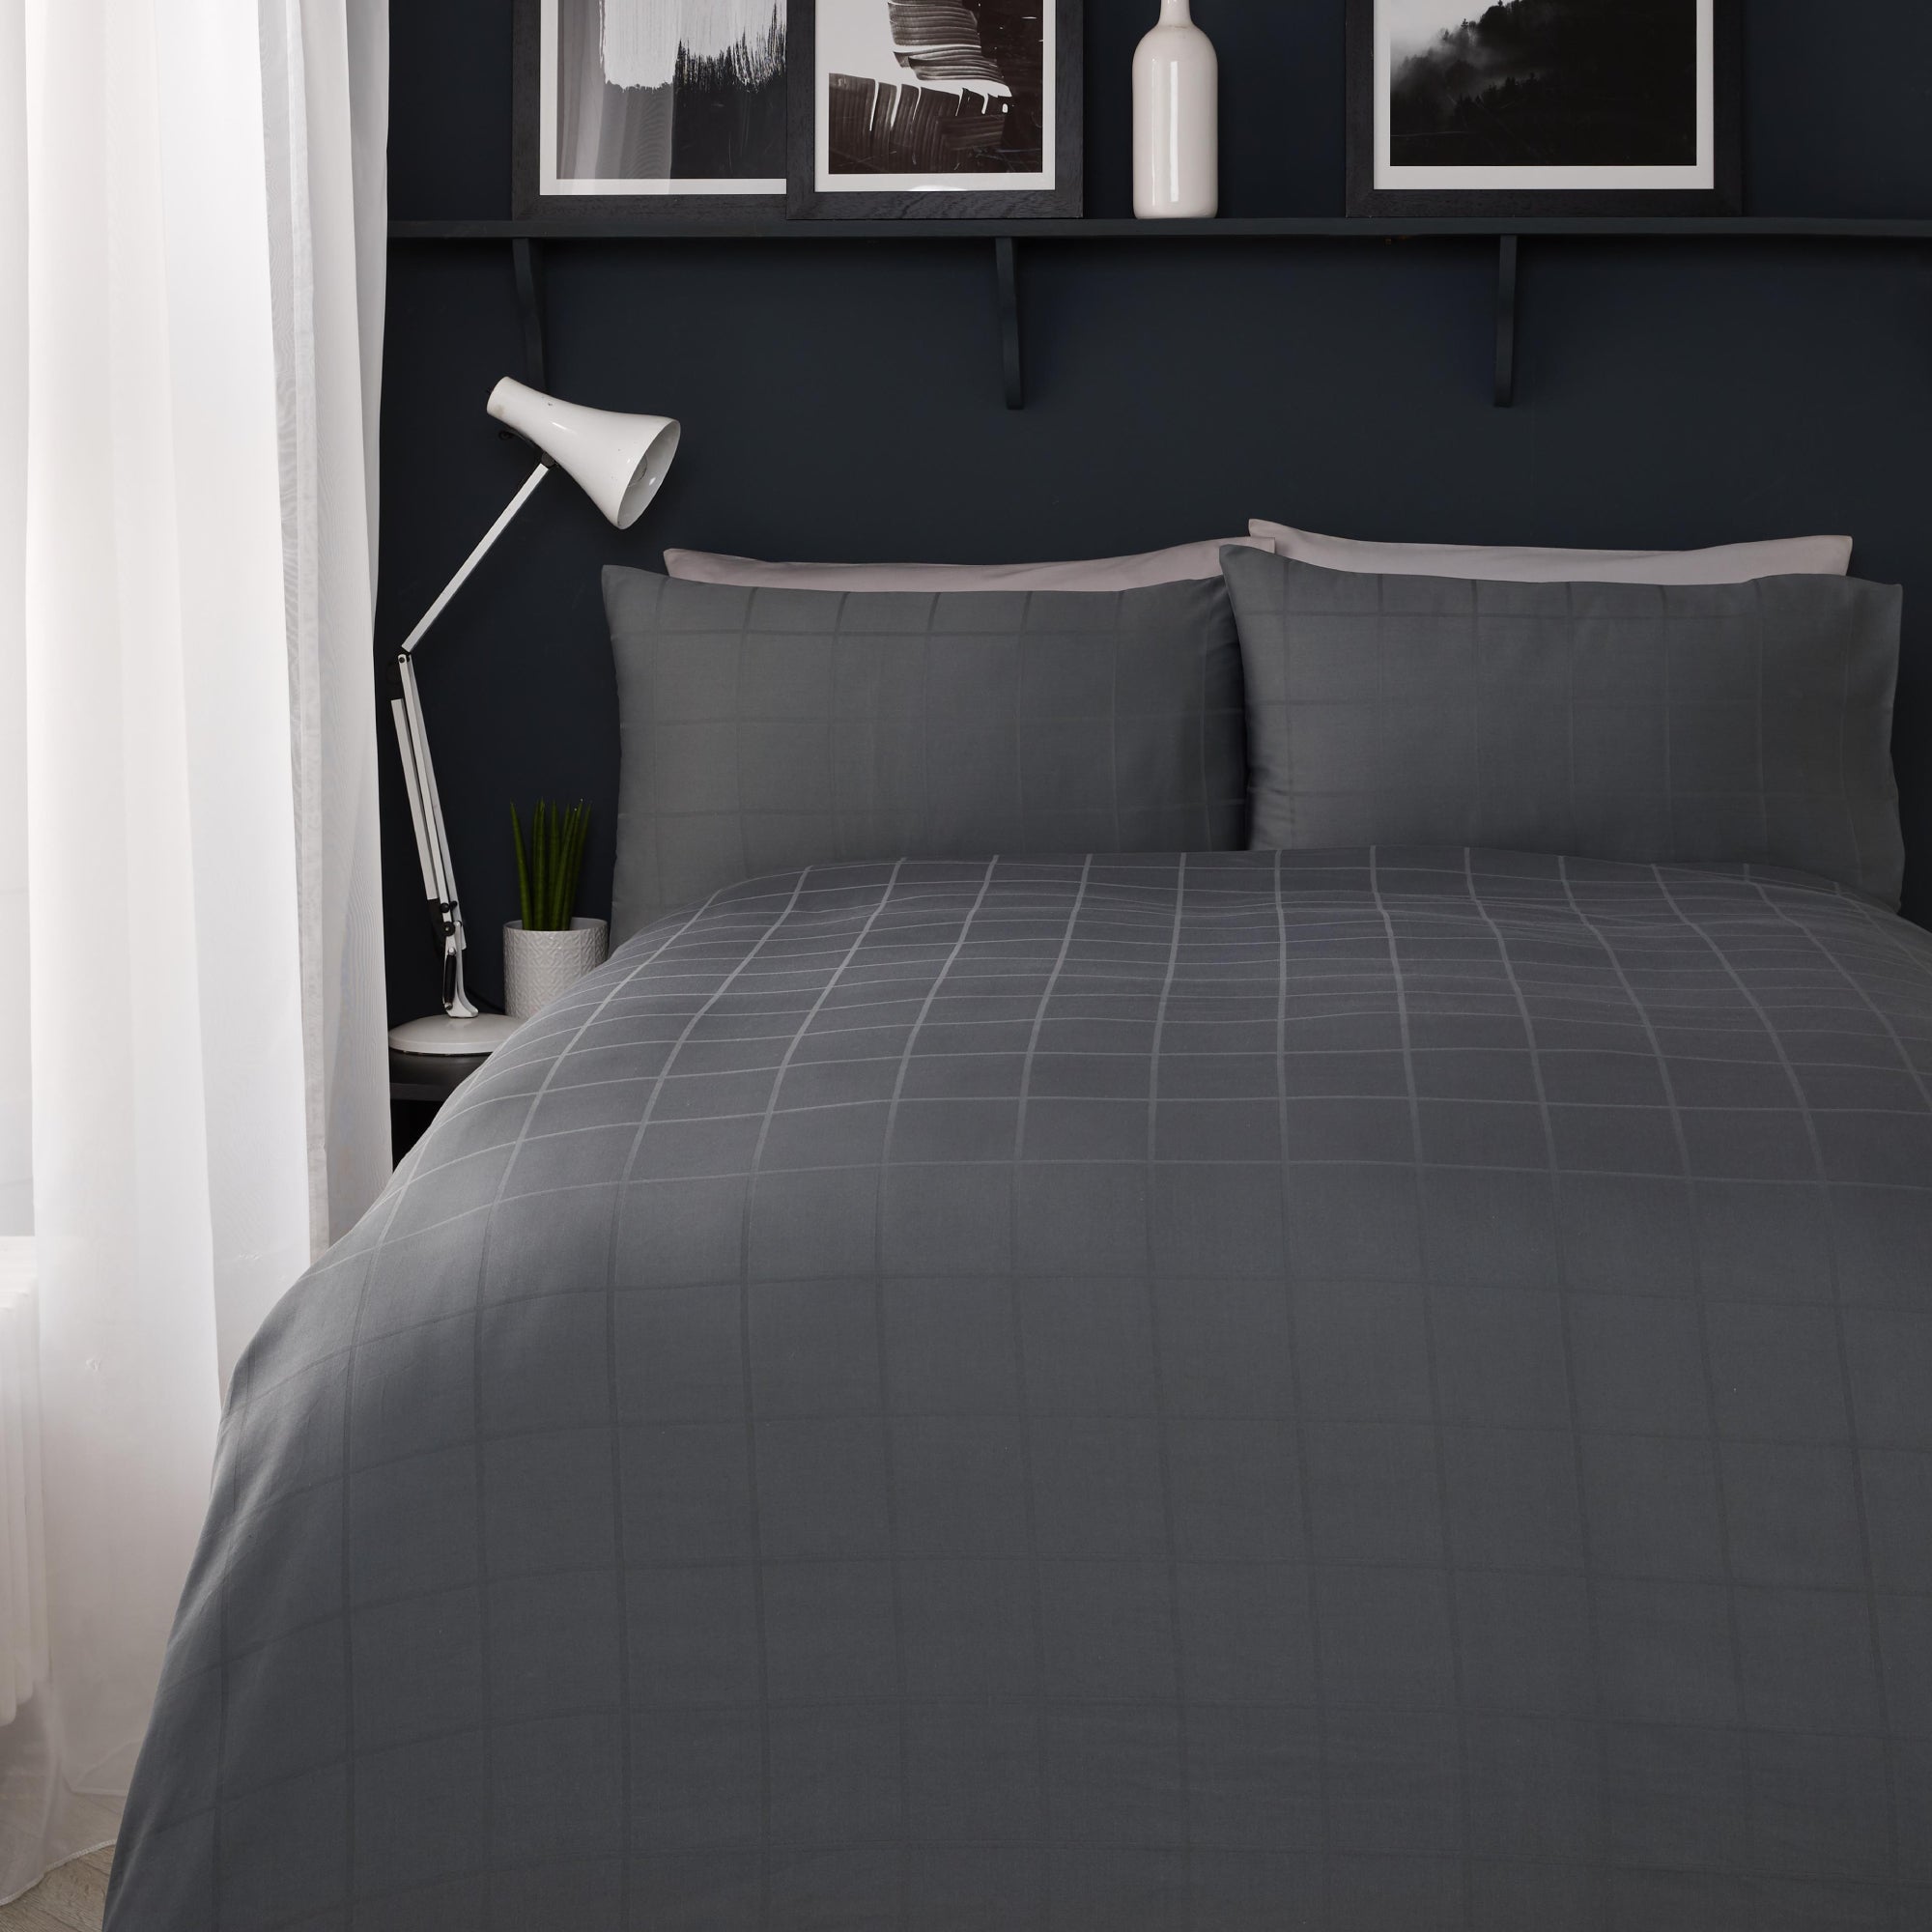 Duvet Cover Set Sorelle by Appletree Boutique in Charcoal